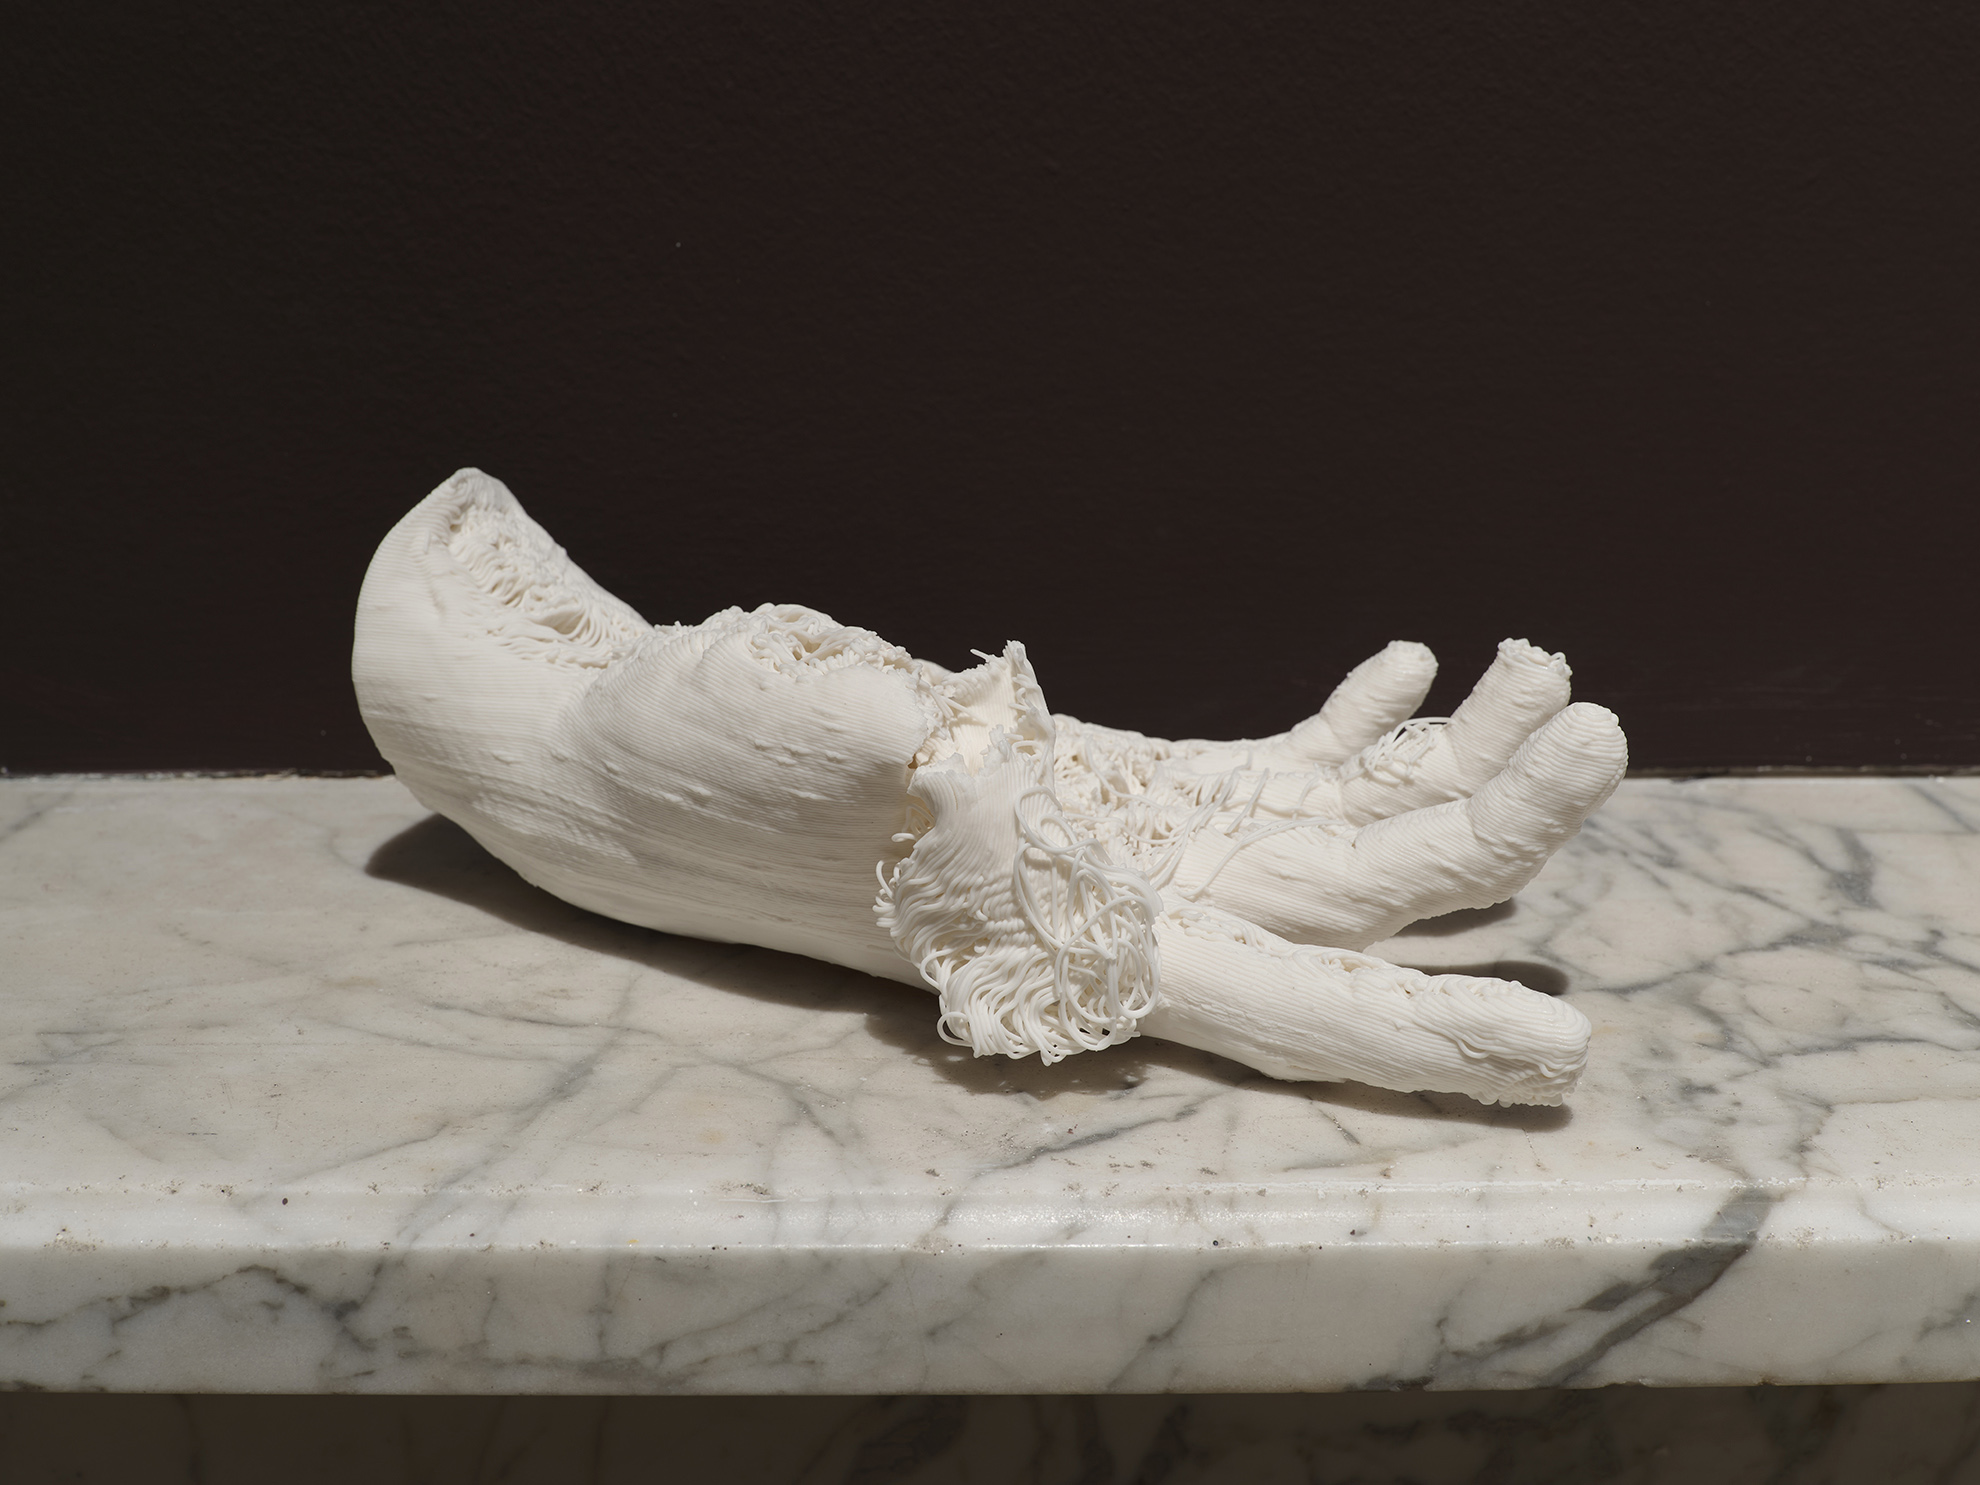 White porcelain hand, 3D printed with errors and torn at the side, on top of a marble mantlepiece against a brown wall.